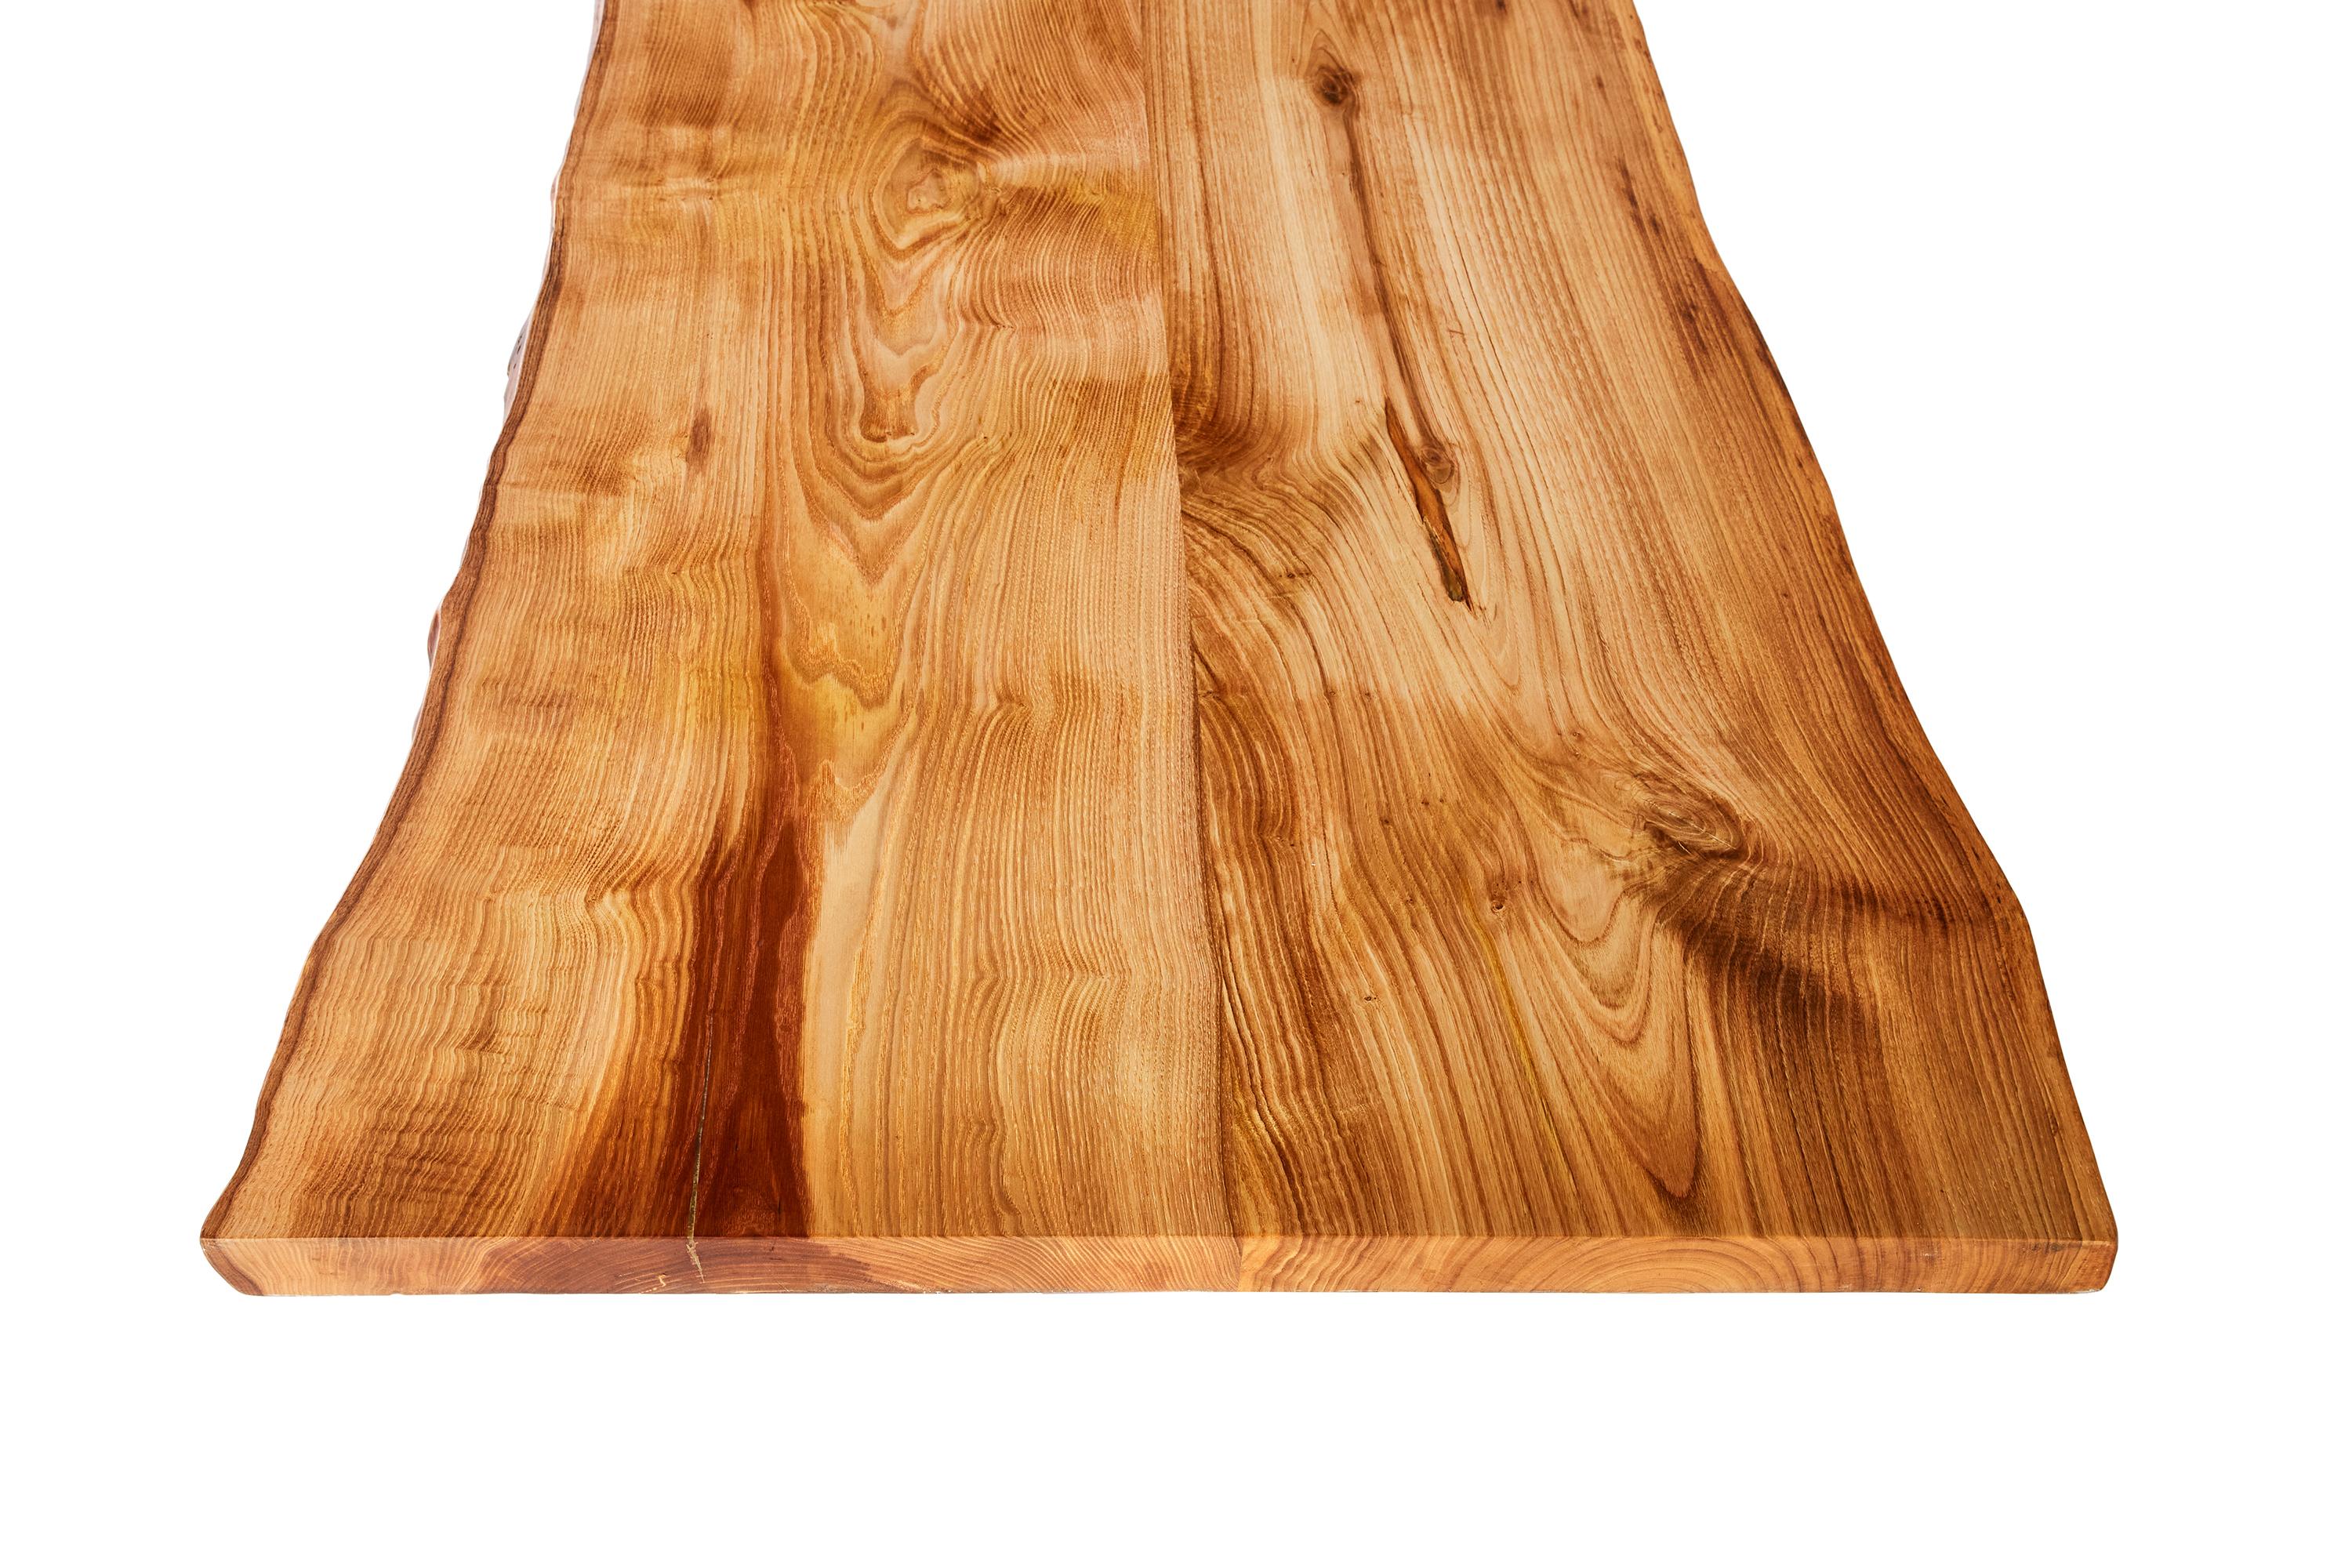 The stunning ash wood table shown here was made in Ankara, Turkey with wood gathered walnut wood from the forests of the Mediterranean. The wood is kilned and dried prior to being filled with high quality resin in areas of natural cracking. The